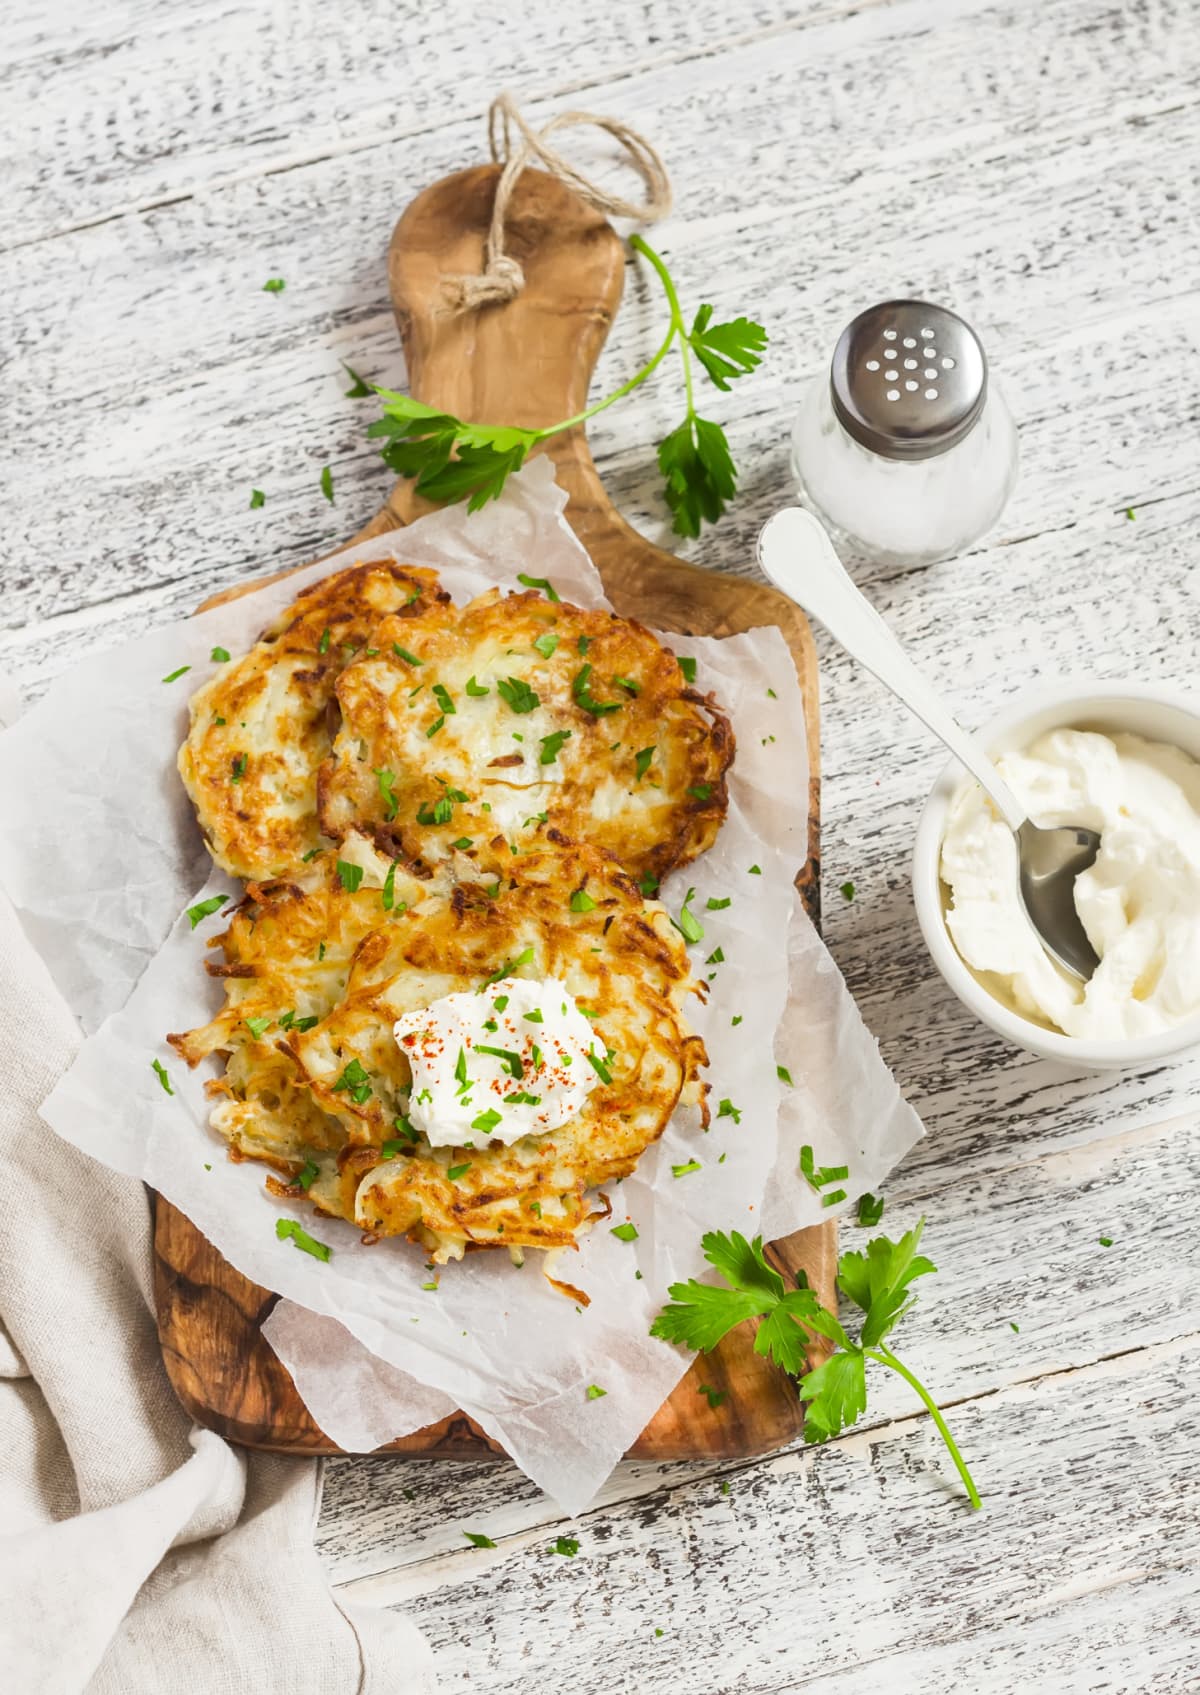 Fresh latkes topped with cilantro and sour cream on a parchment lined wooden serving board